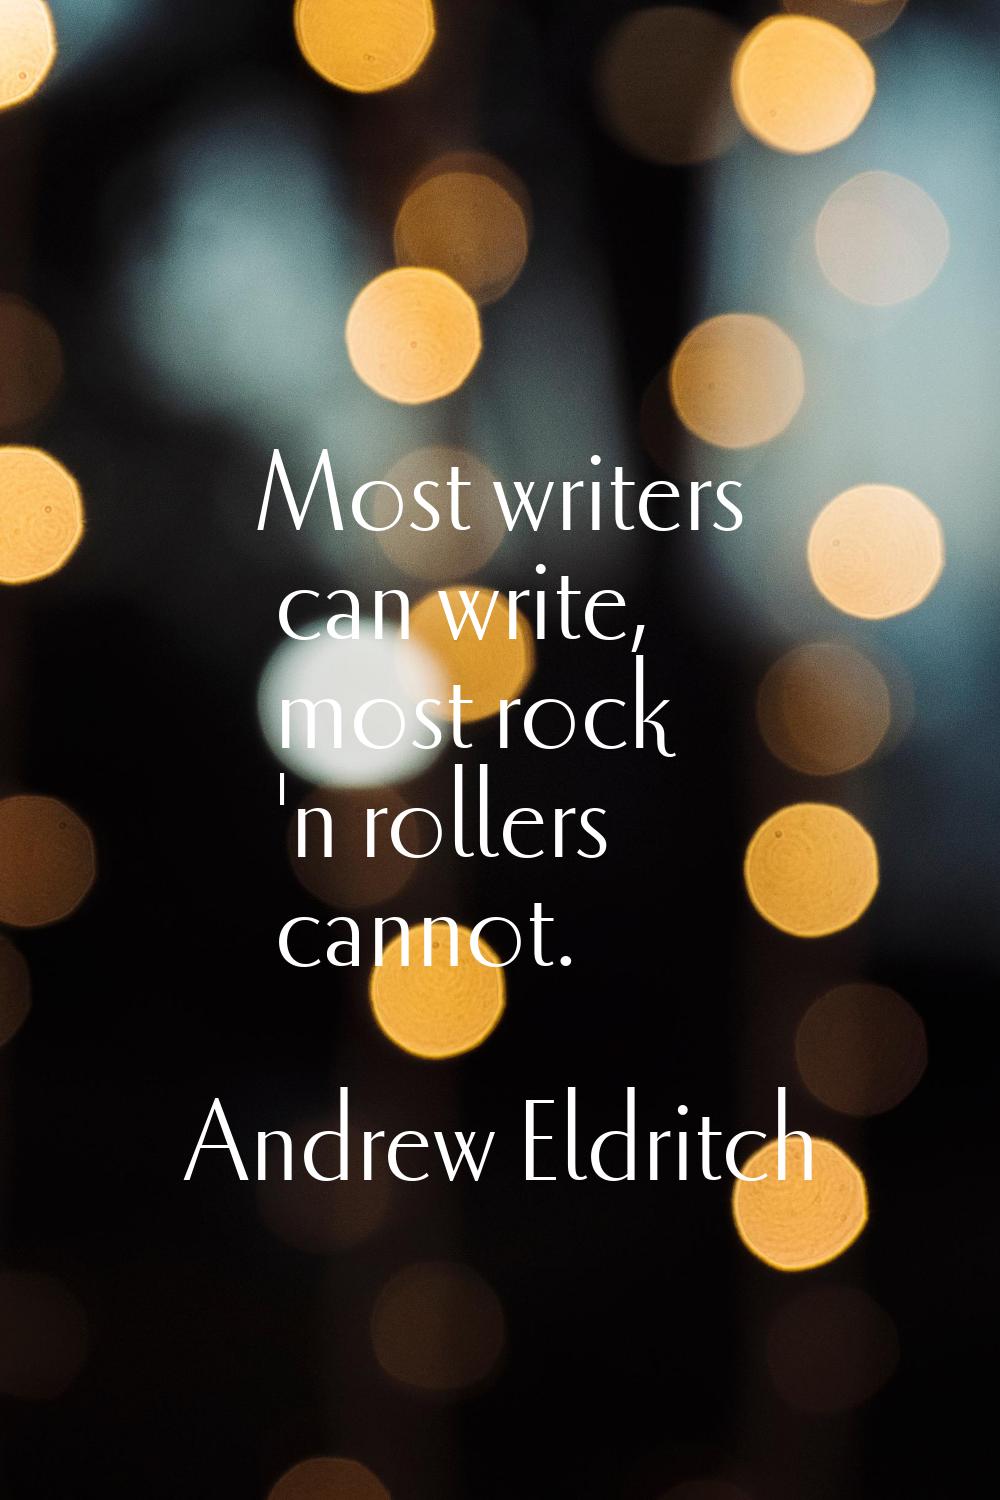 Most writers can write, most rock 'n rollers cannot.